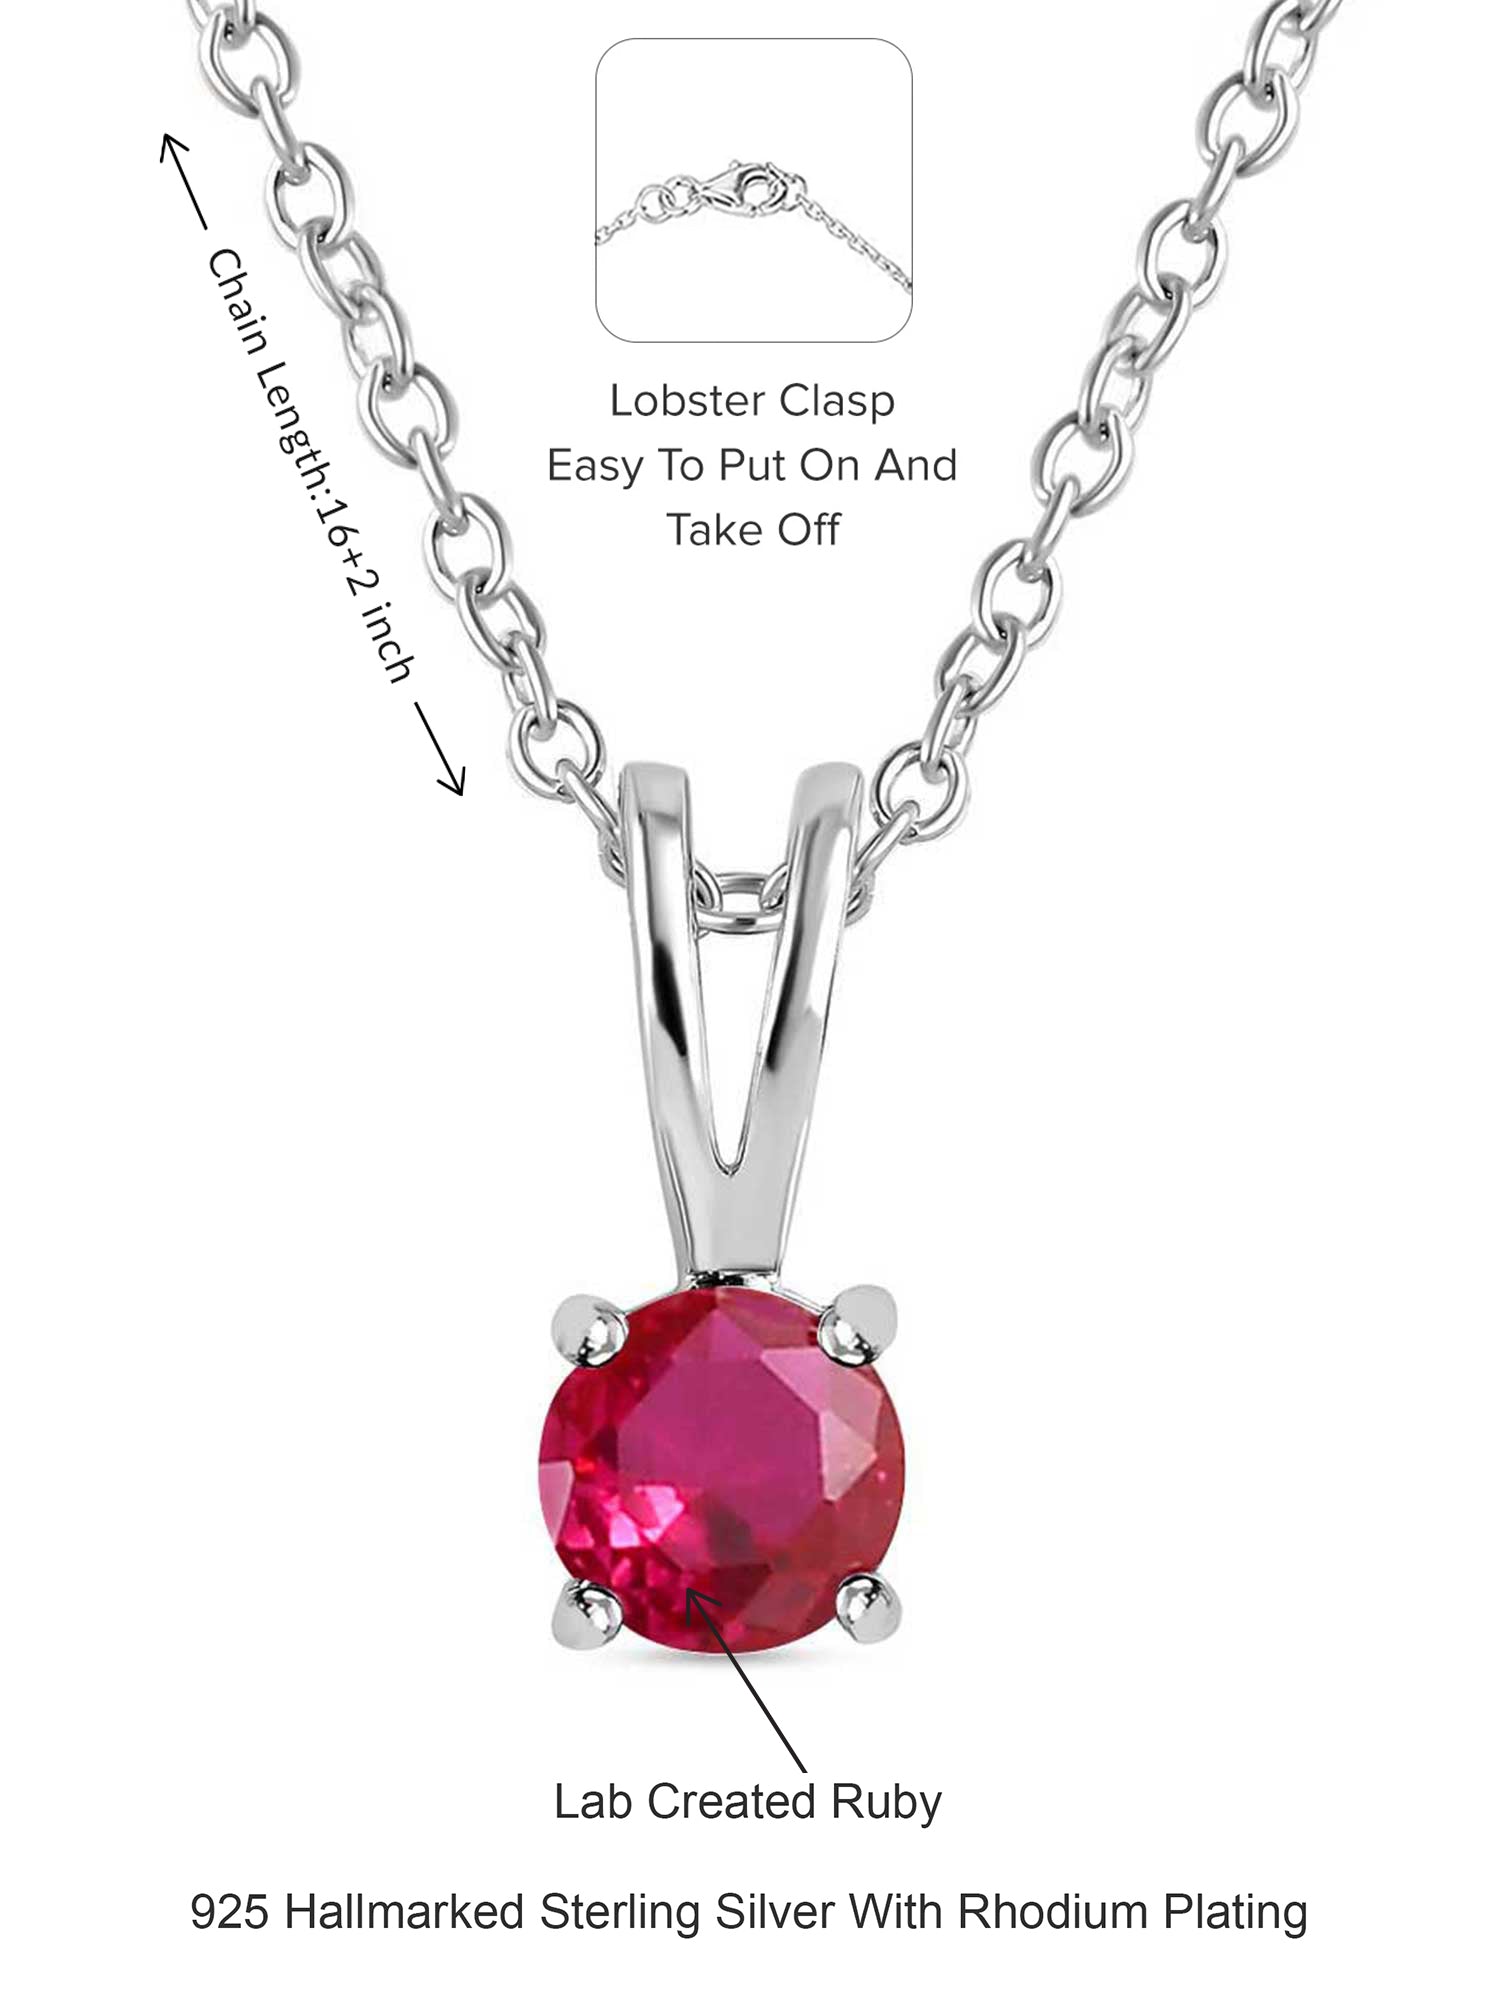 0.5 Carat Ruby Daily Wear Solitaire Pendant With Chain-5